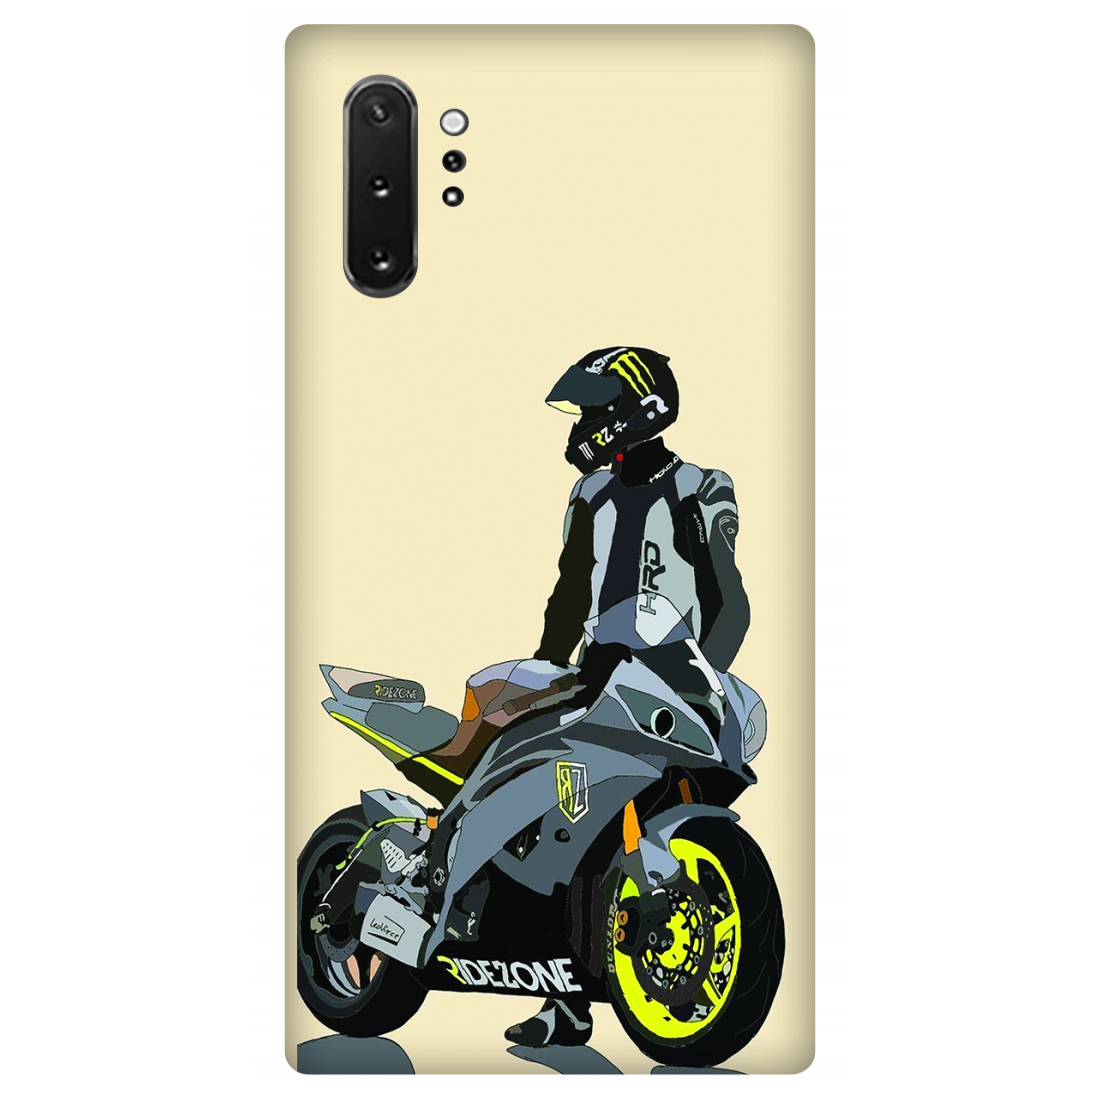 Motorcycle Lifestyle Case Samsung Galaxy Note 10 Plus